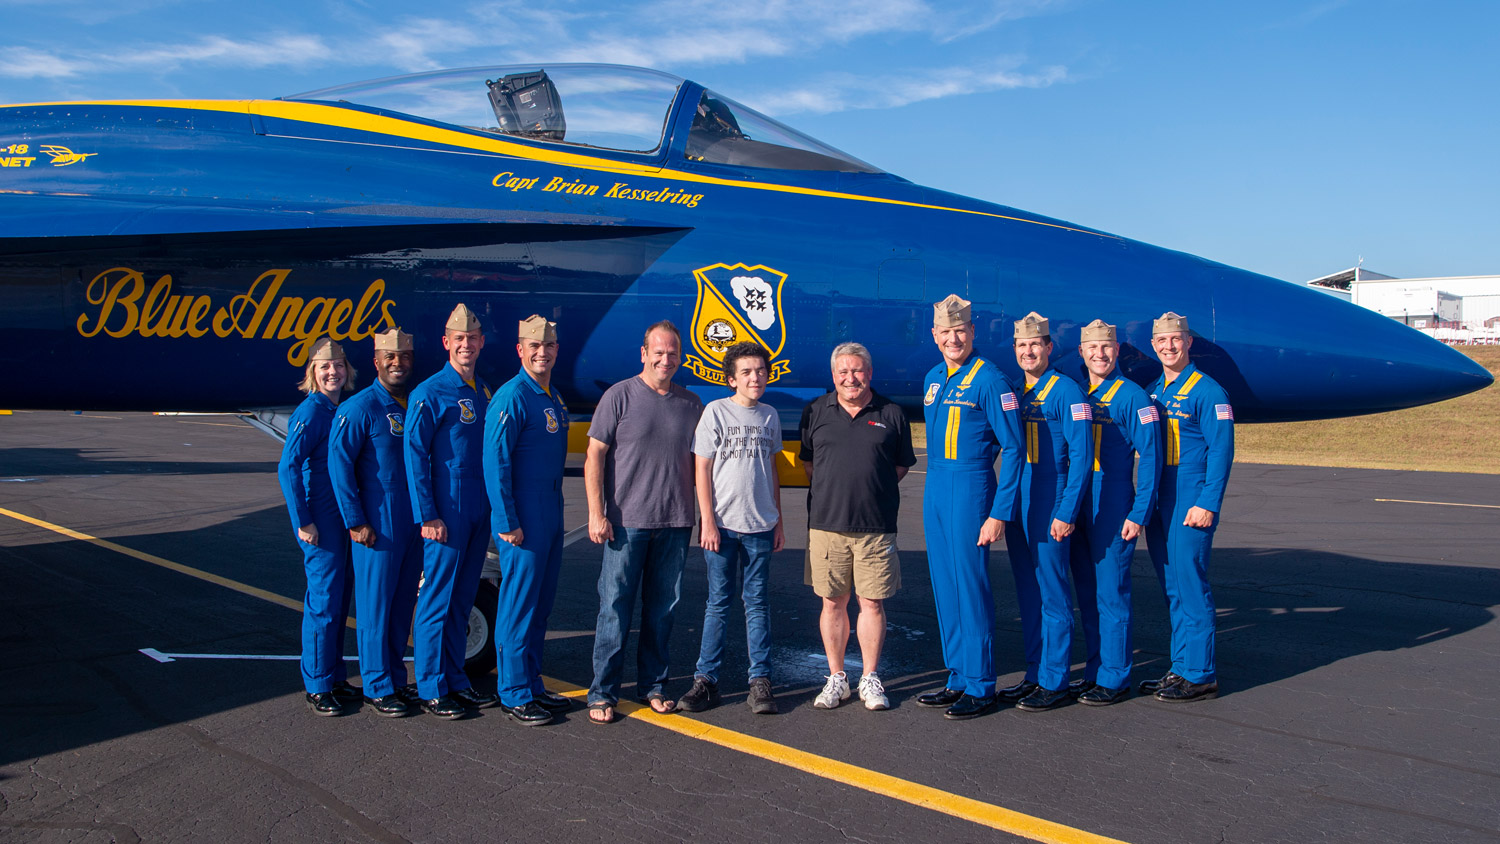 sound production service for the Blue Angels by Jay Rabbitt & ICP